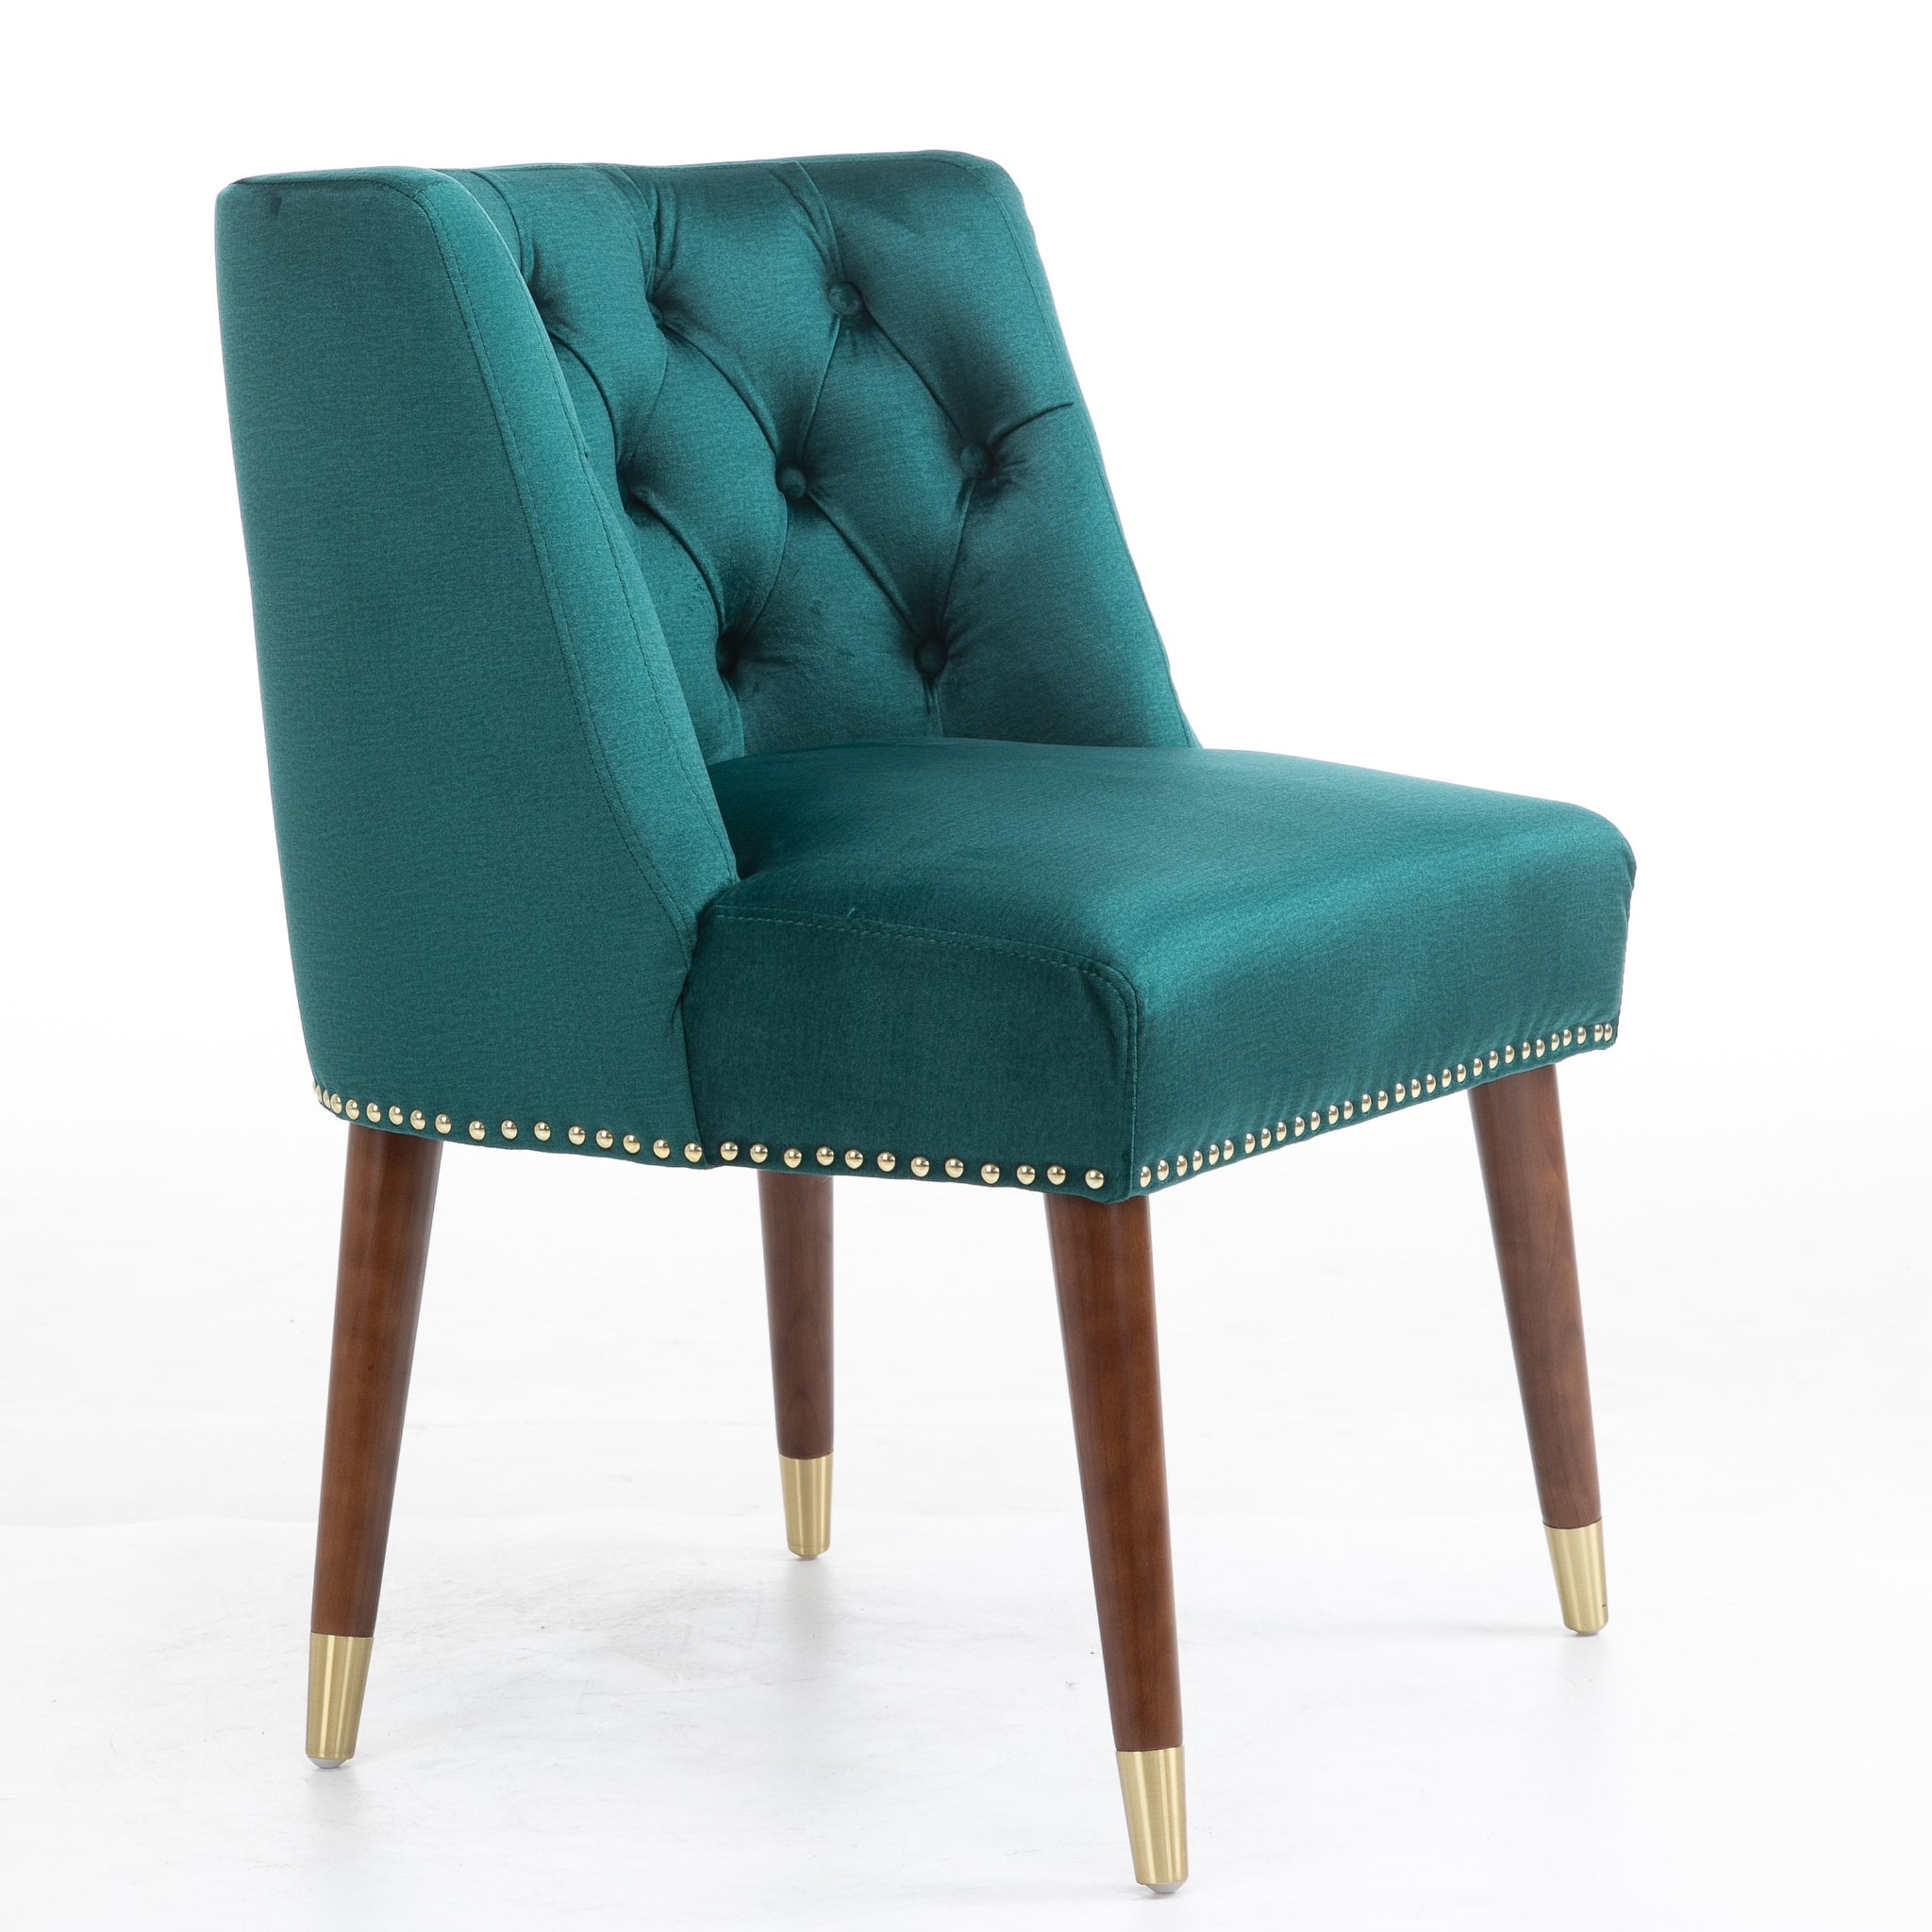 Green Upholstered Chair with Tufted Back and Seat